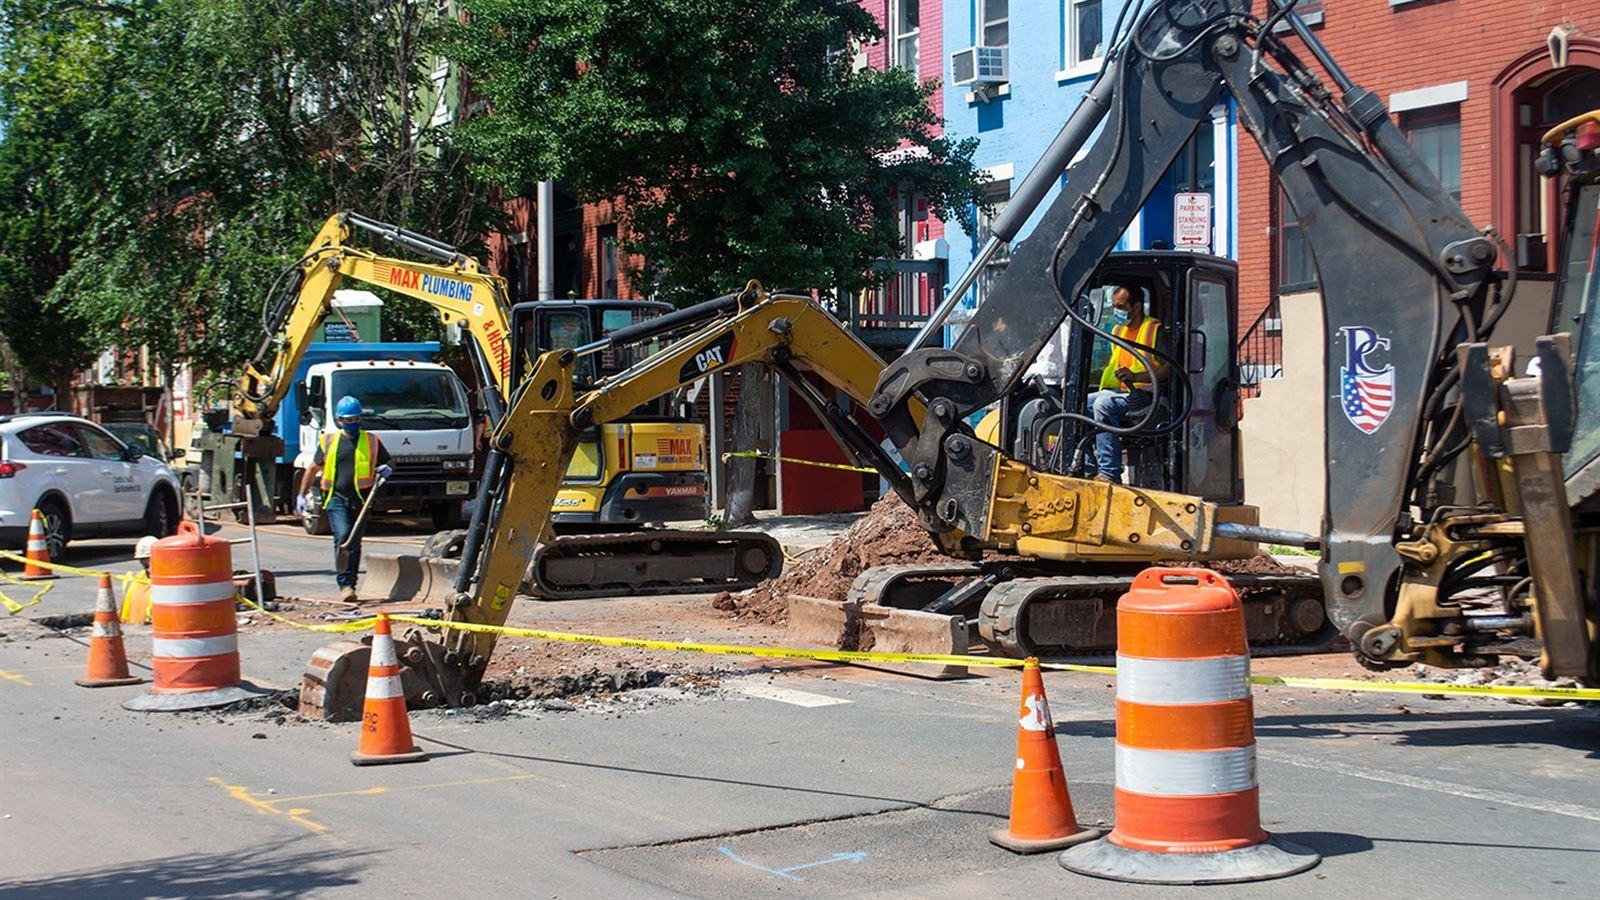 An excavator digs up a street in Newark, NJ as part of the city's lead service line replacement program